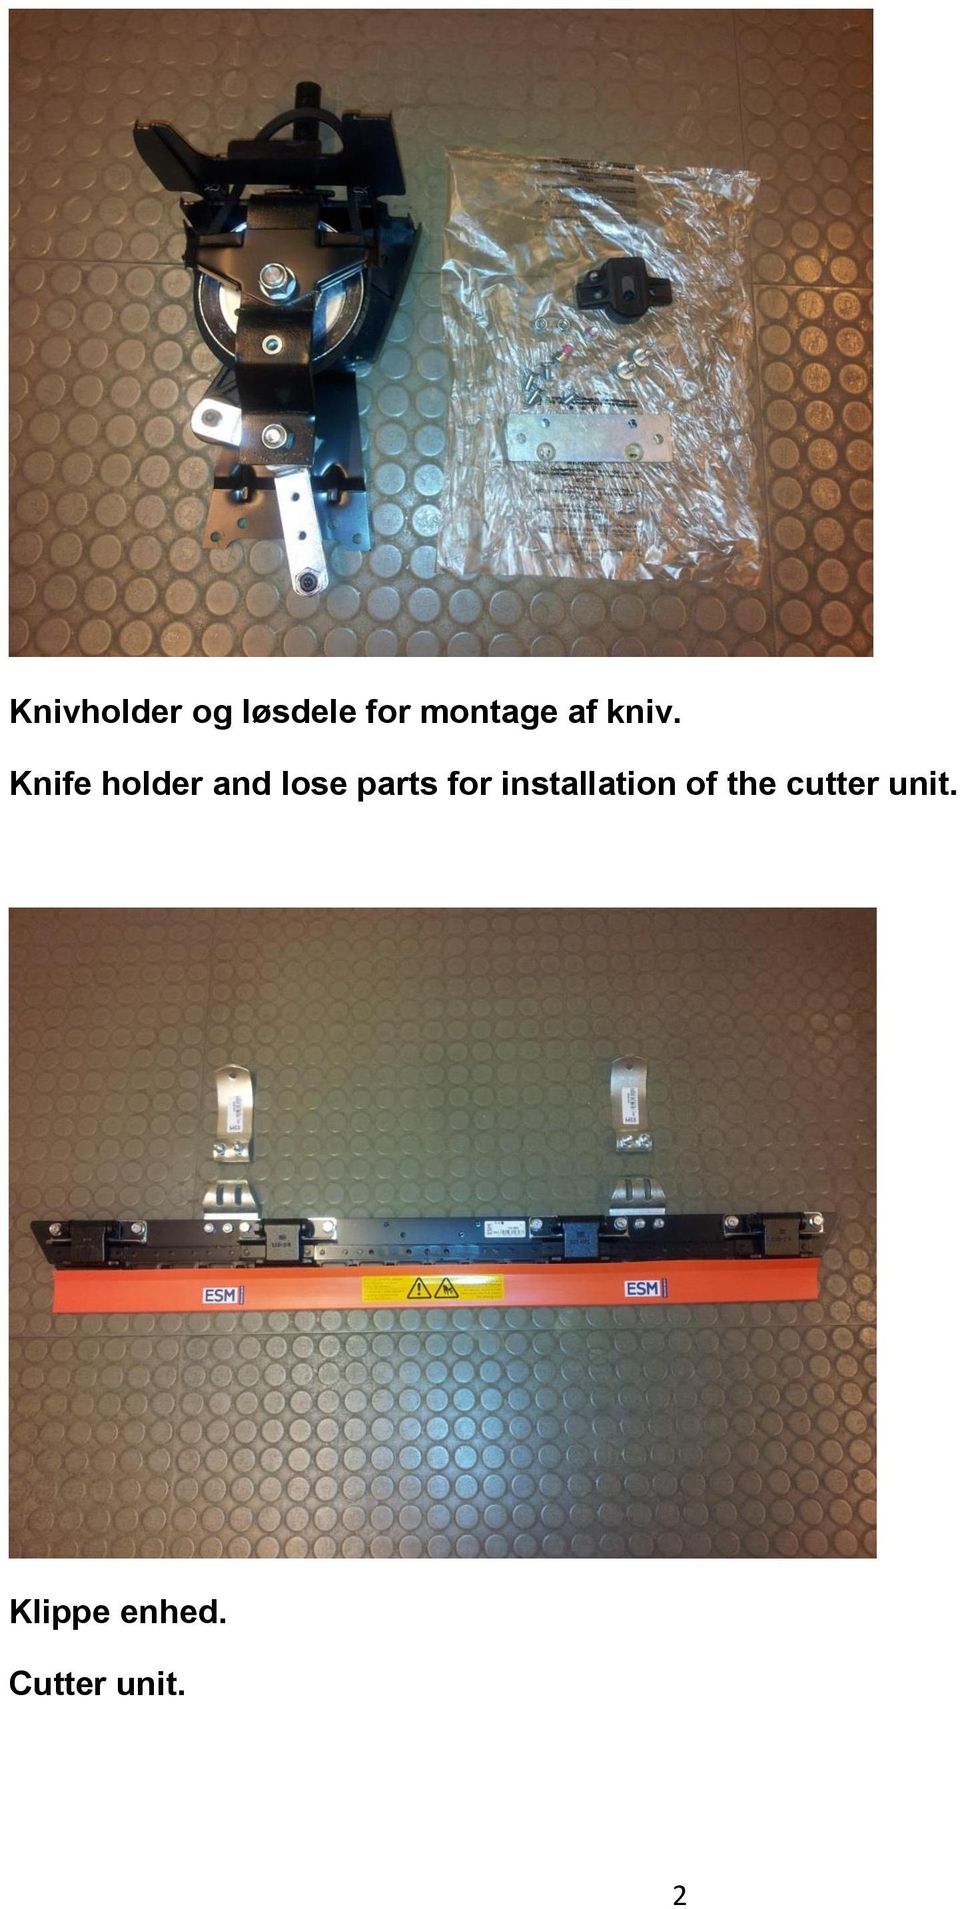 Knife holder and lose parts for